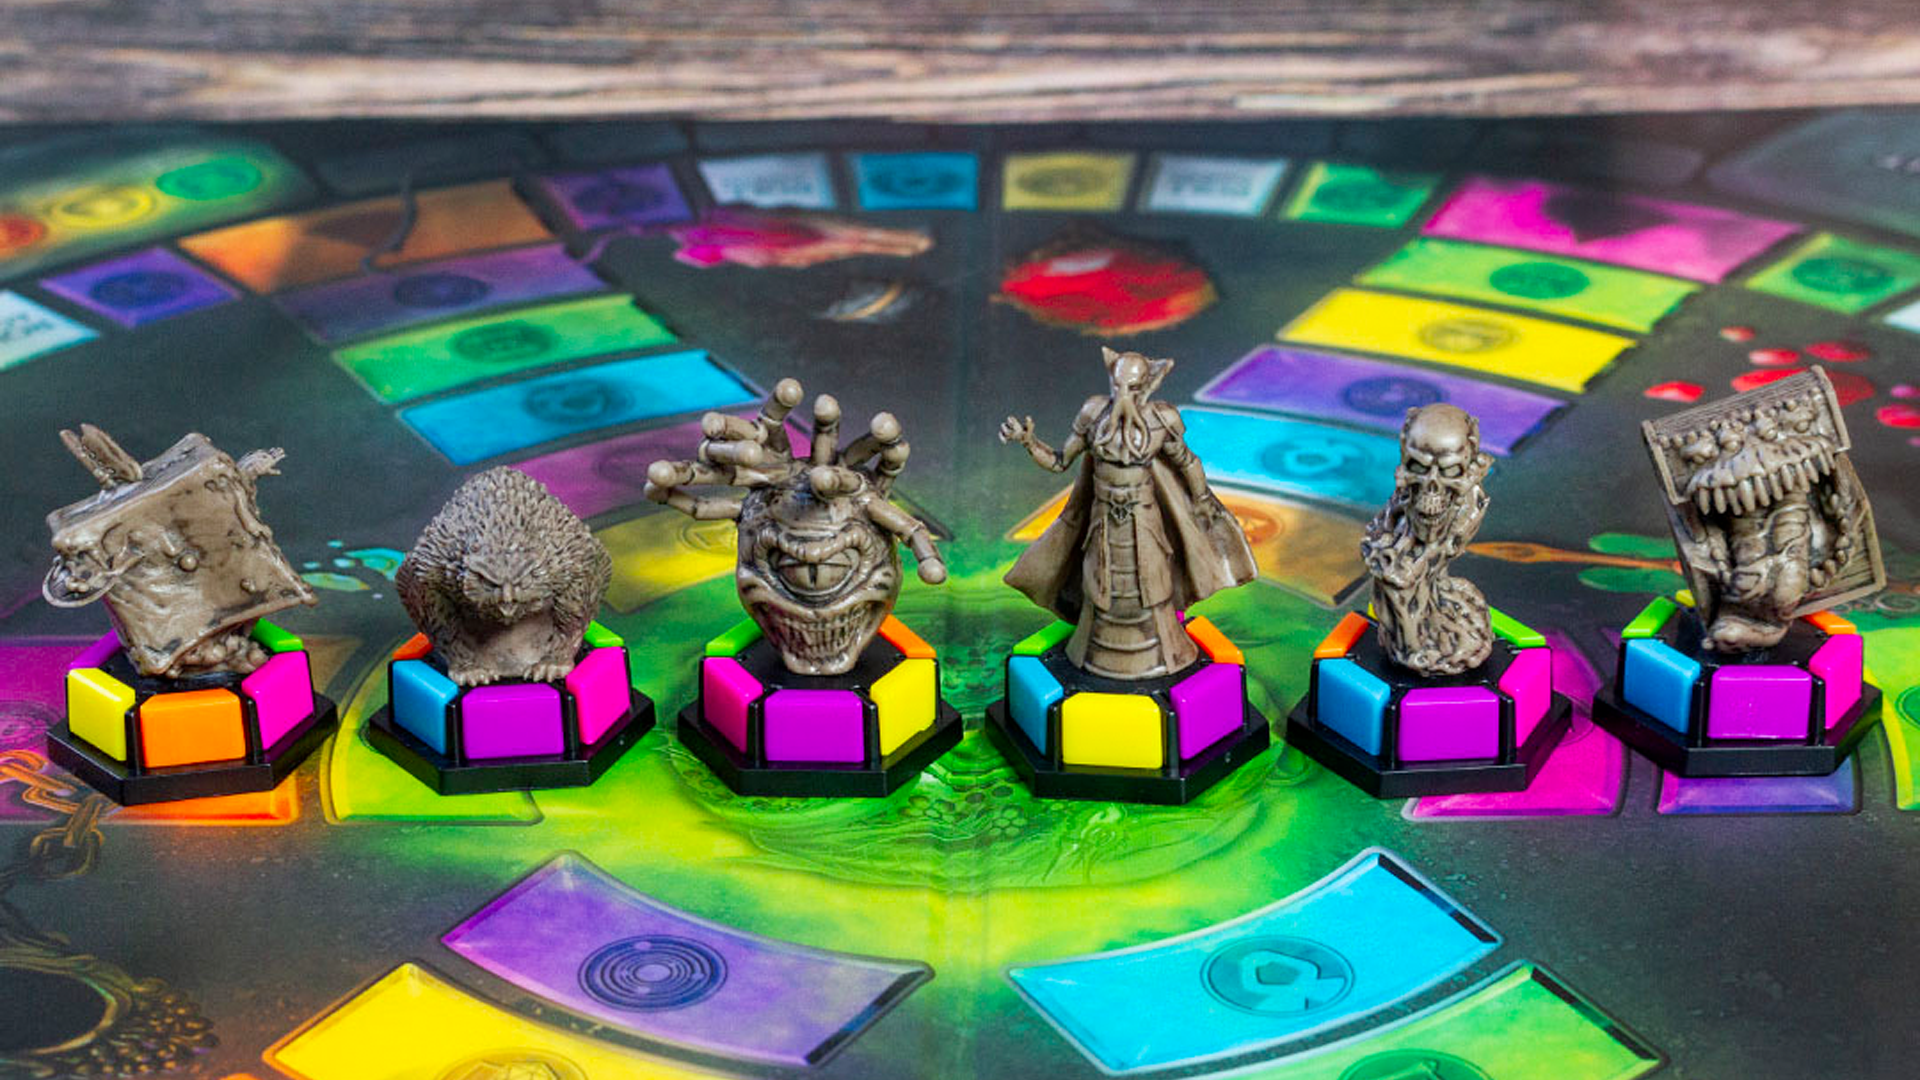 Image for How well do you know Dungeons & Dragons? Roll for WIS with our quiz! (Sponsored)